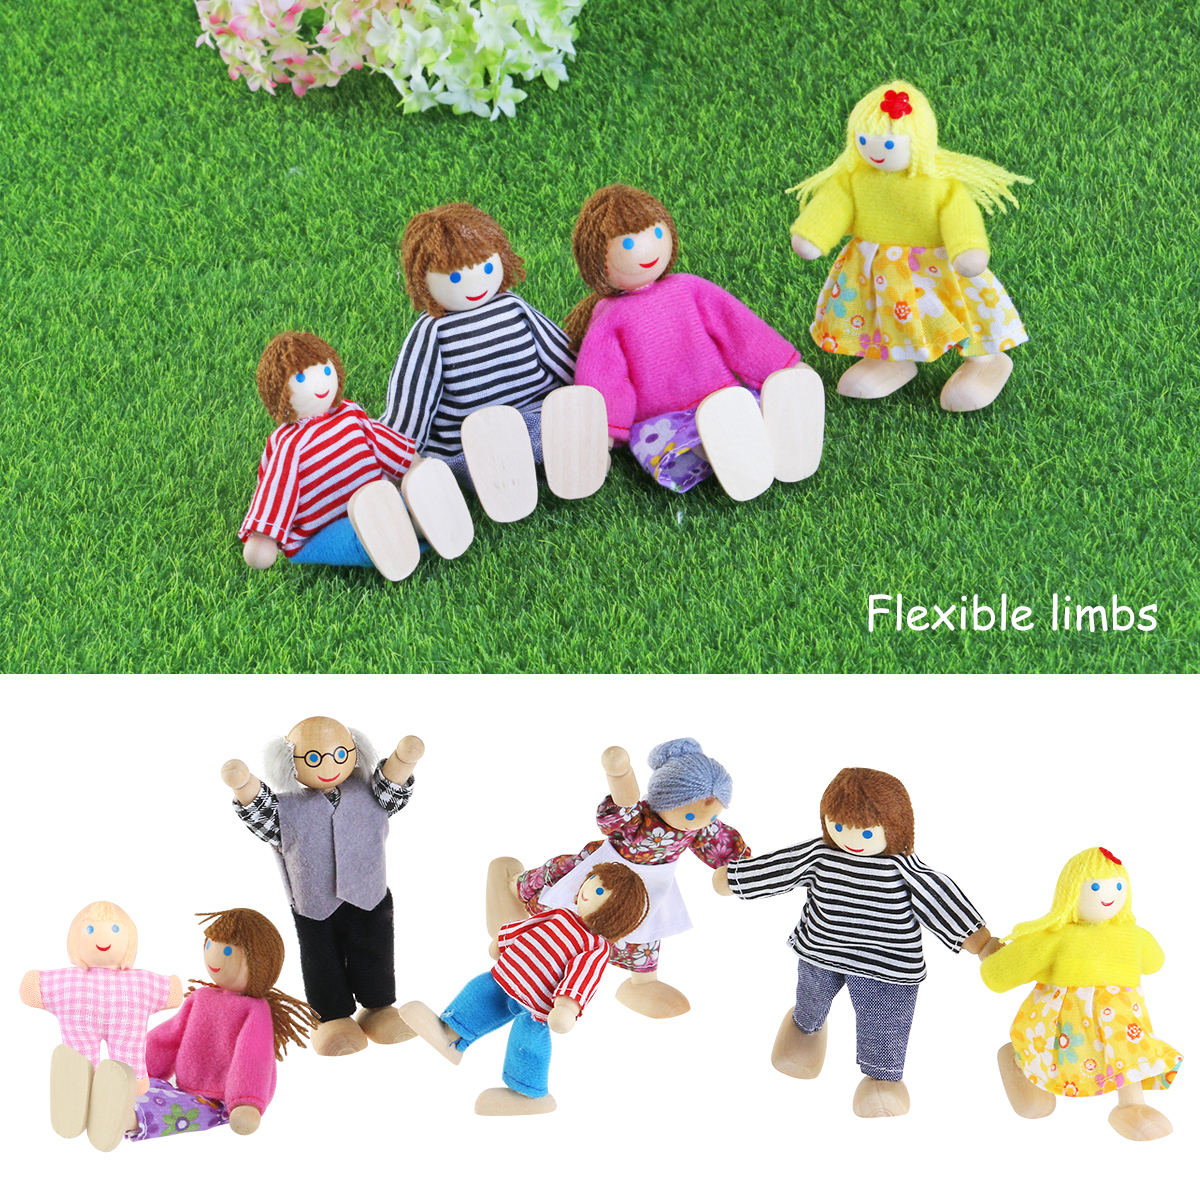 7Pcs Wooden Dollhouse Family Set Pretend Play Figures Accessories for Pretend Dollhouse Toy - image 3 of 9